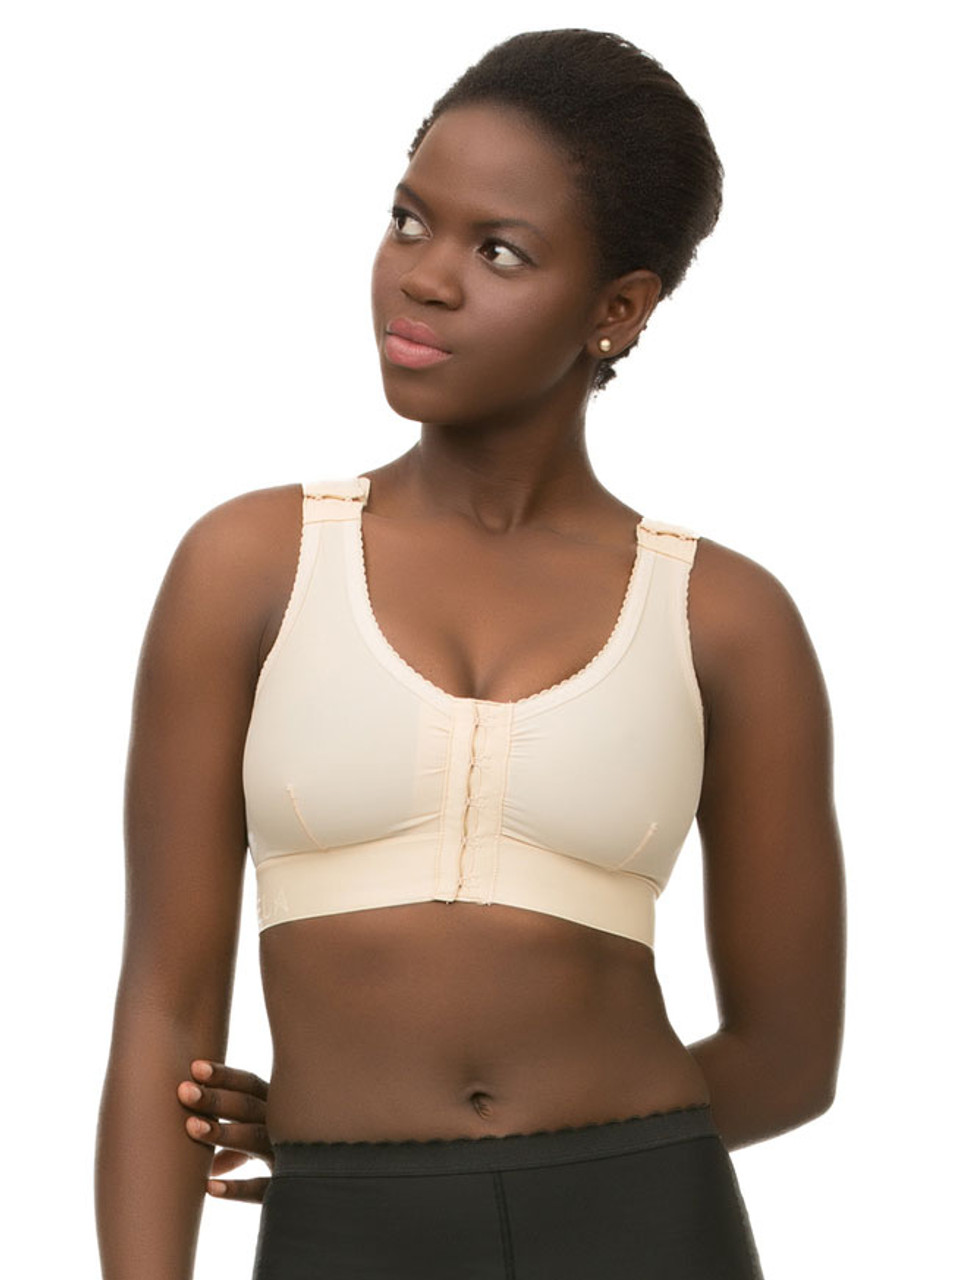 How Long to Wear the Support Bra After Breast Reduction